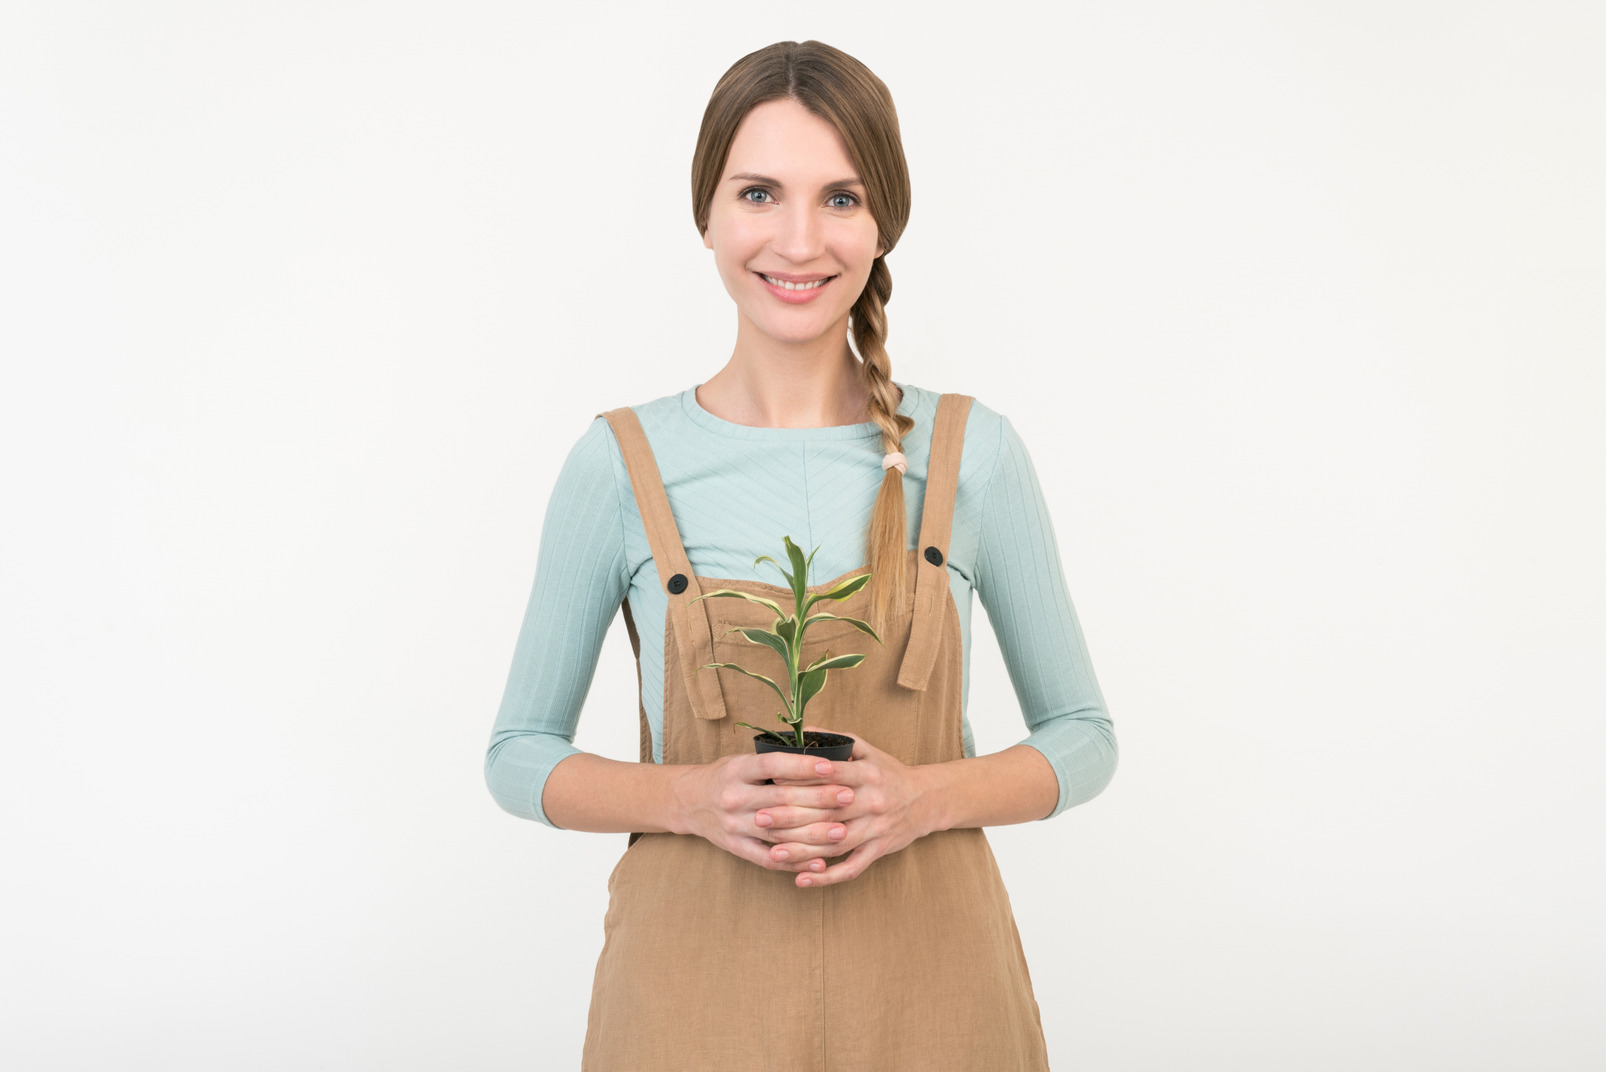 Young female farmer holding plant